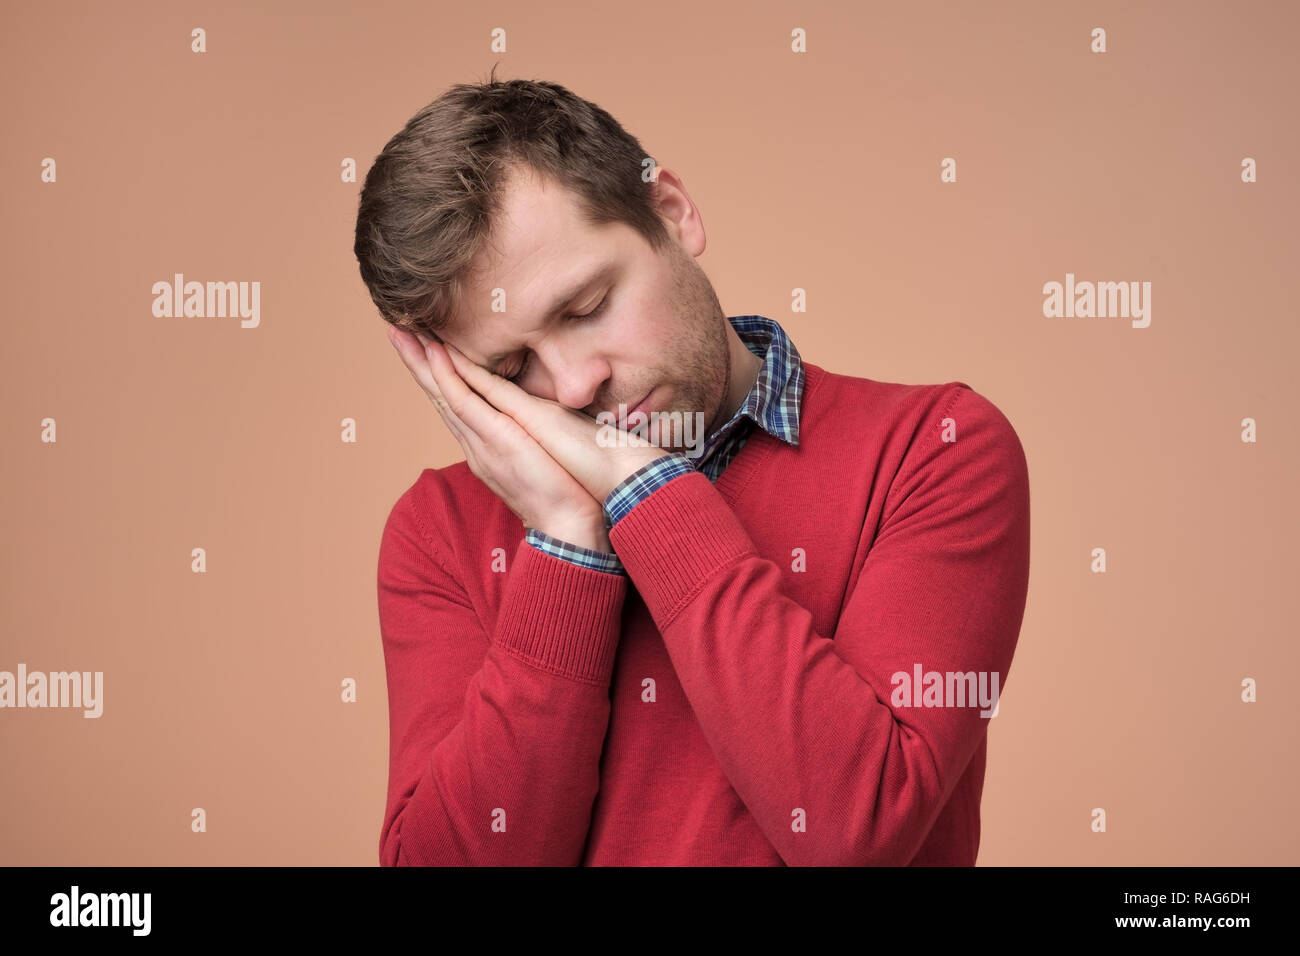 European man in red sweaer being tired standing over brown background. Stock Photo